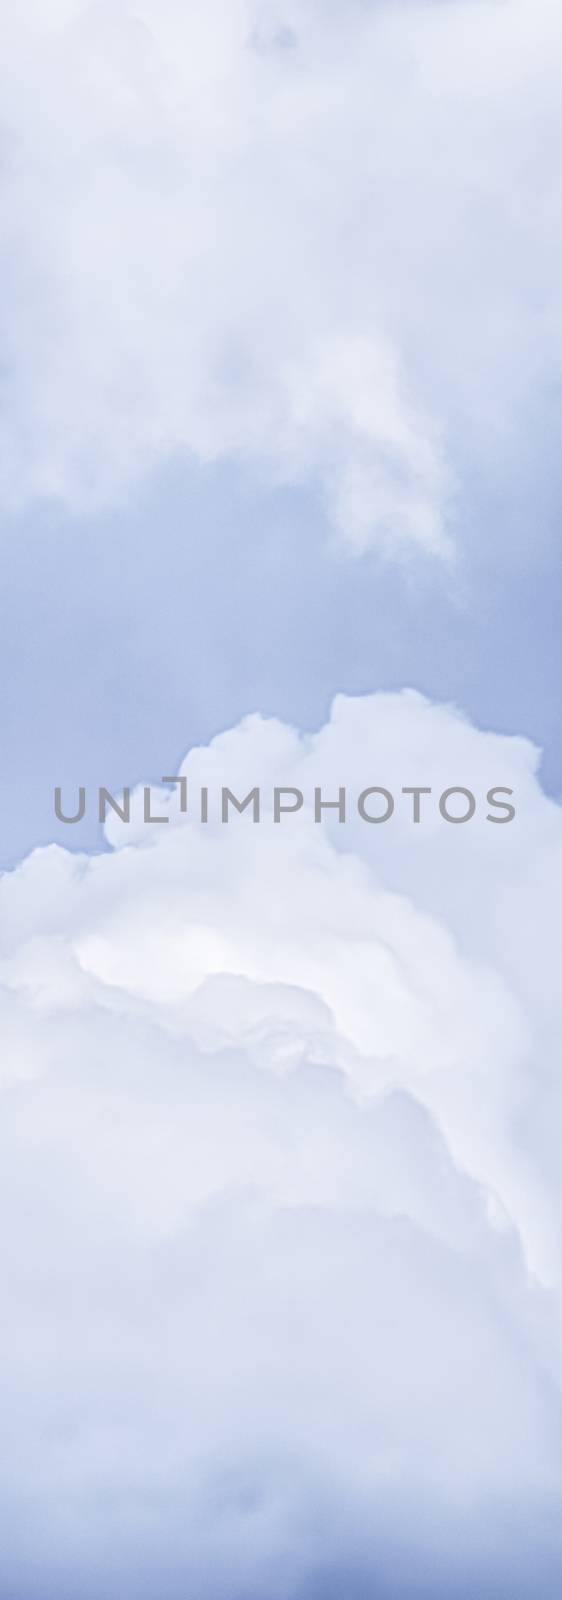 Fantasy and dreamy pastel blue sky, spiritual and nature backgrounds